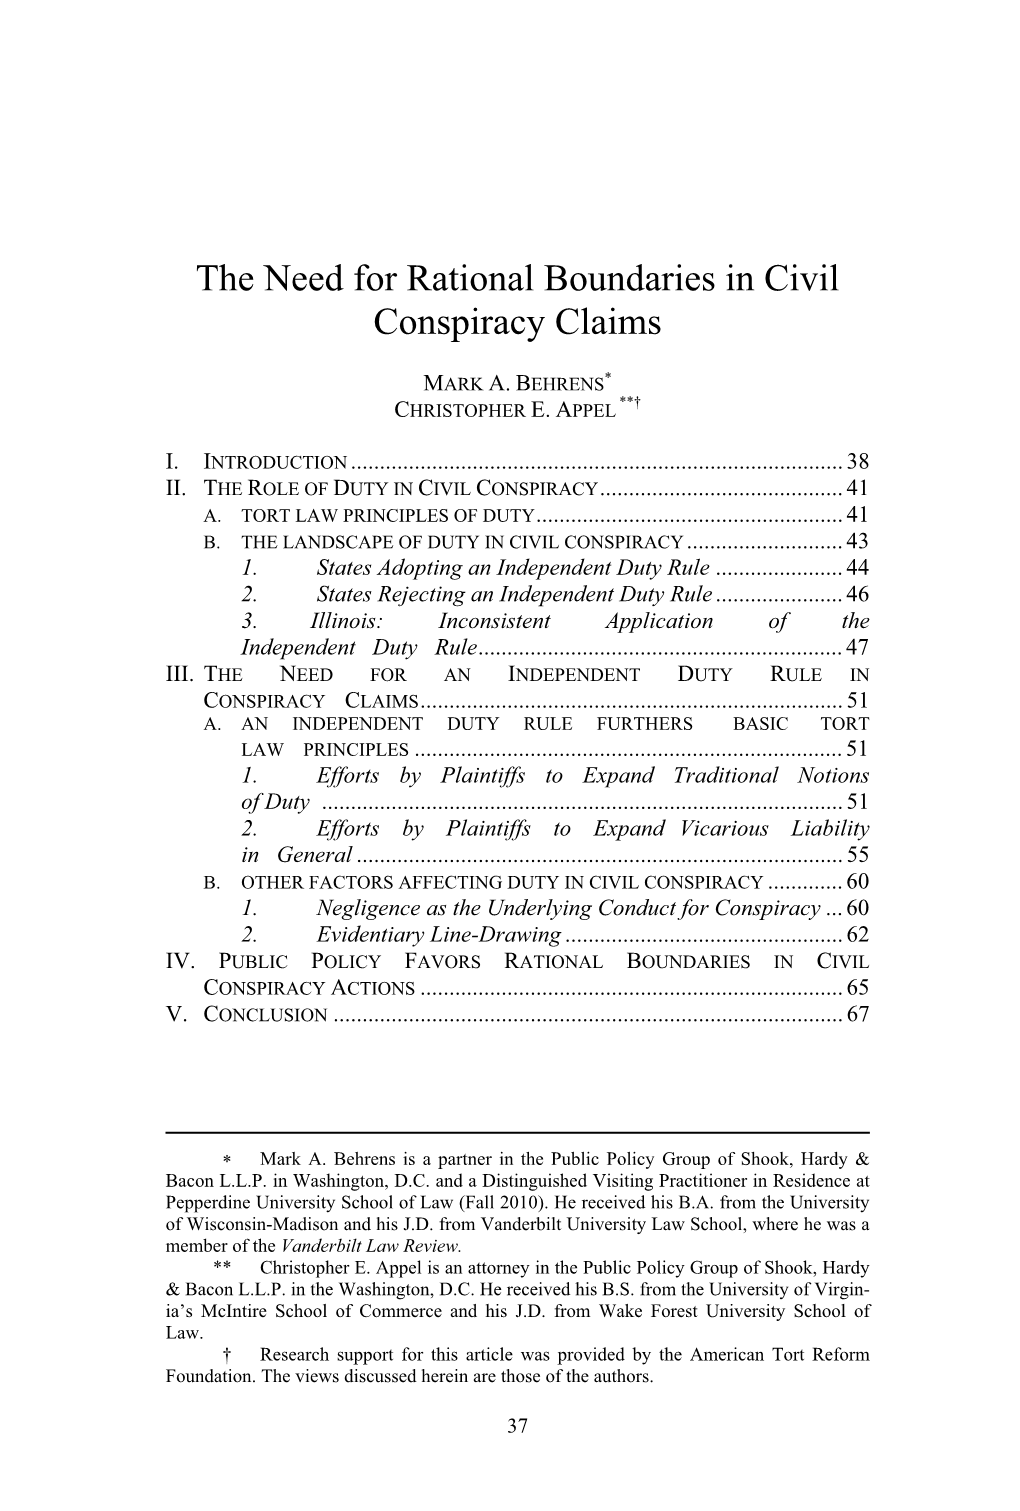 The Need for Rational Boundaries in Civil Conspiracy Claims